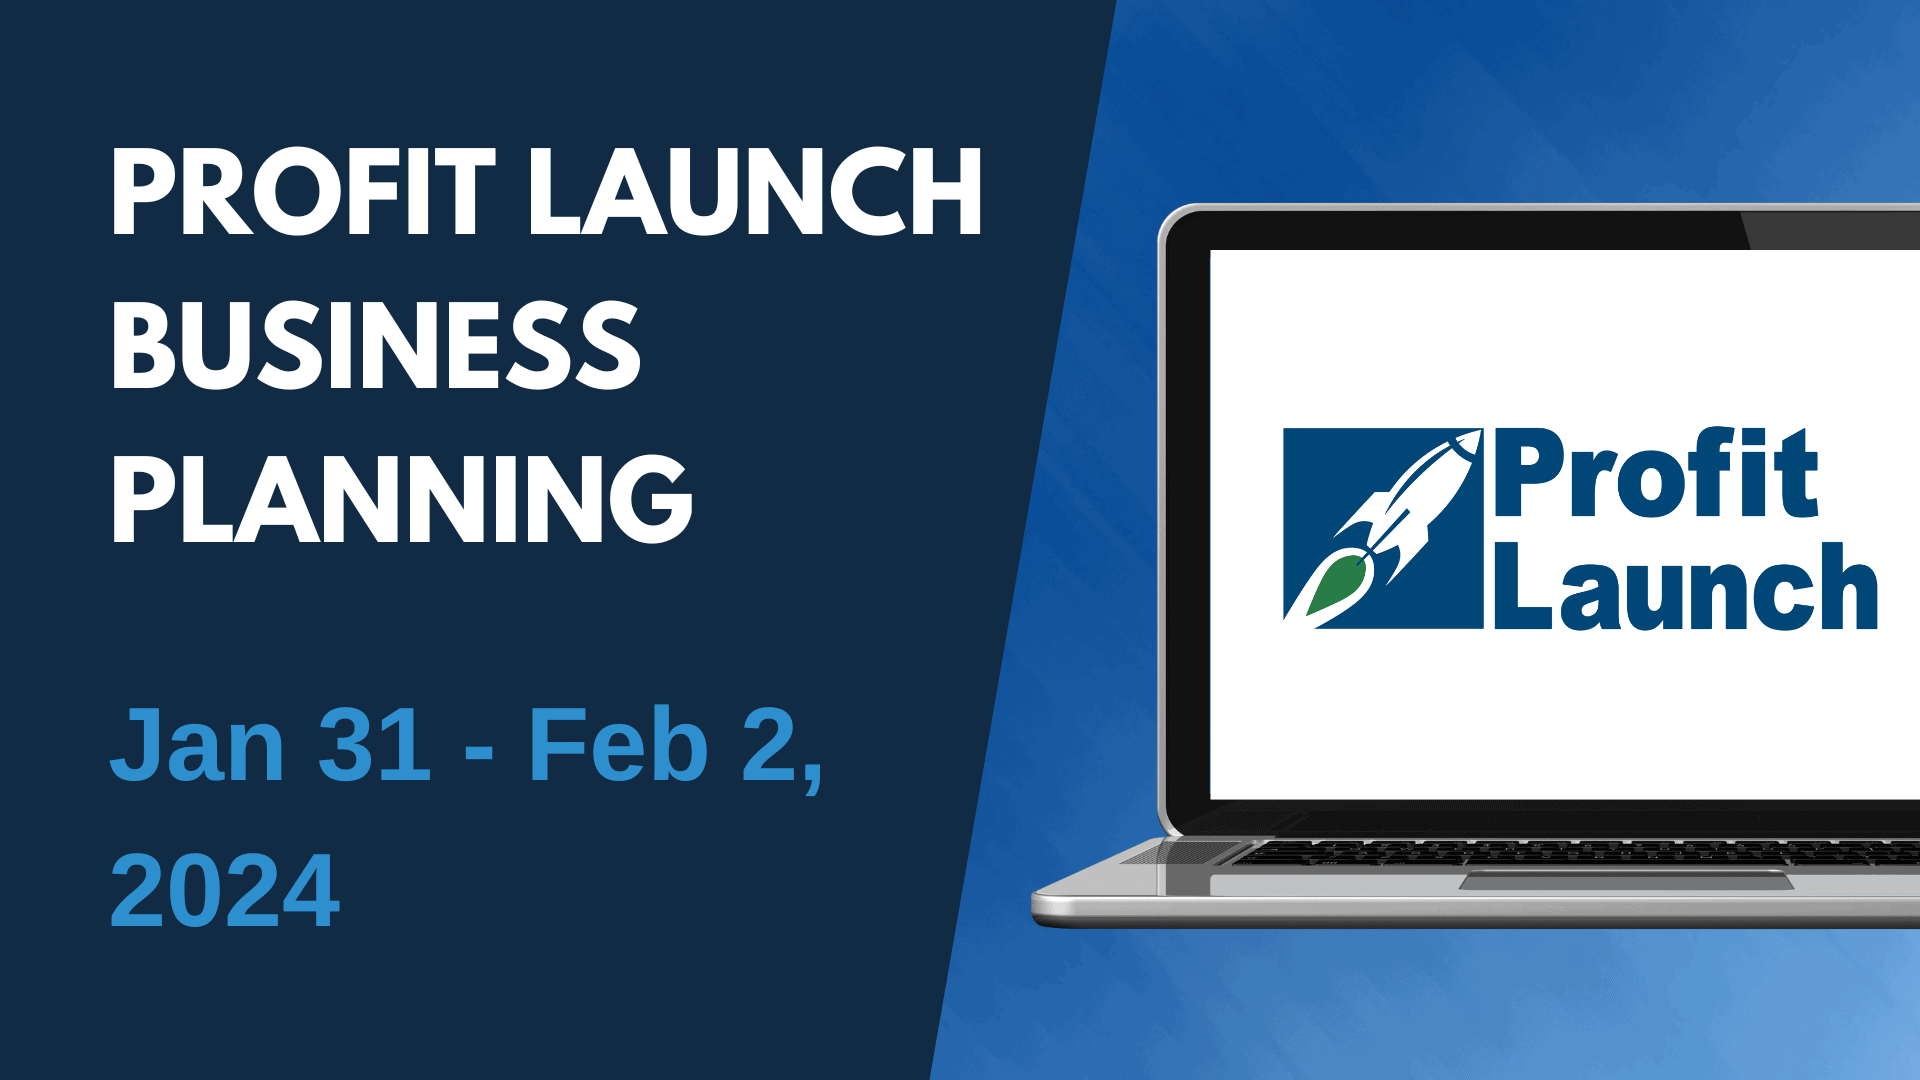 Profit Launch Business Planning - January 31 to February 2